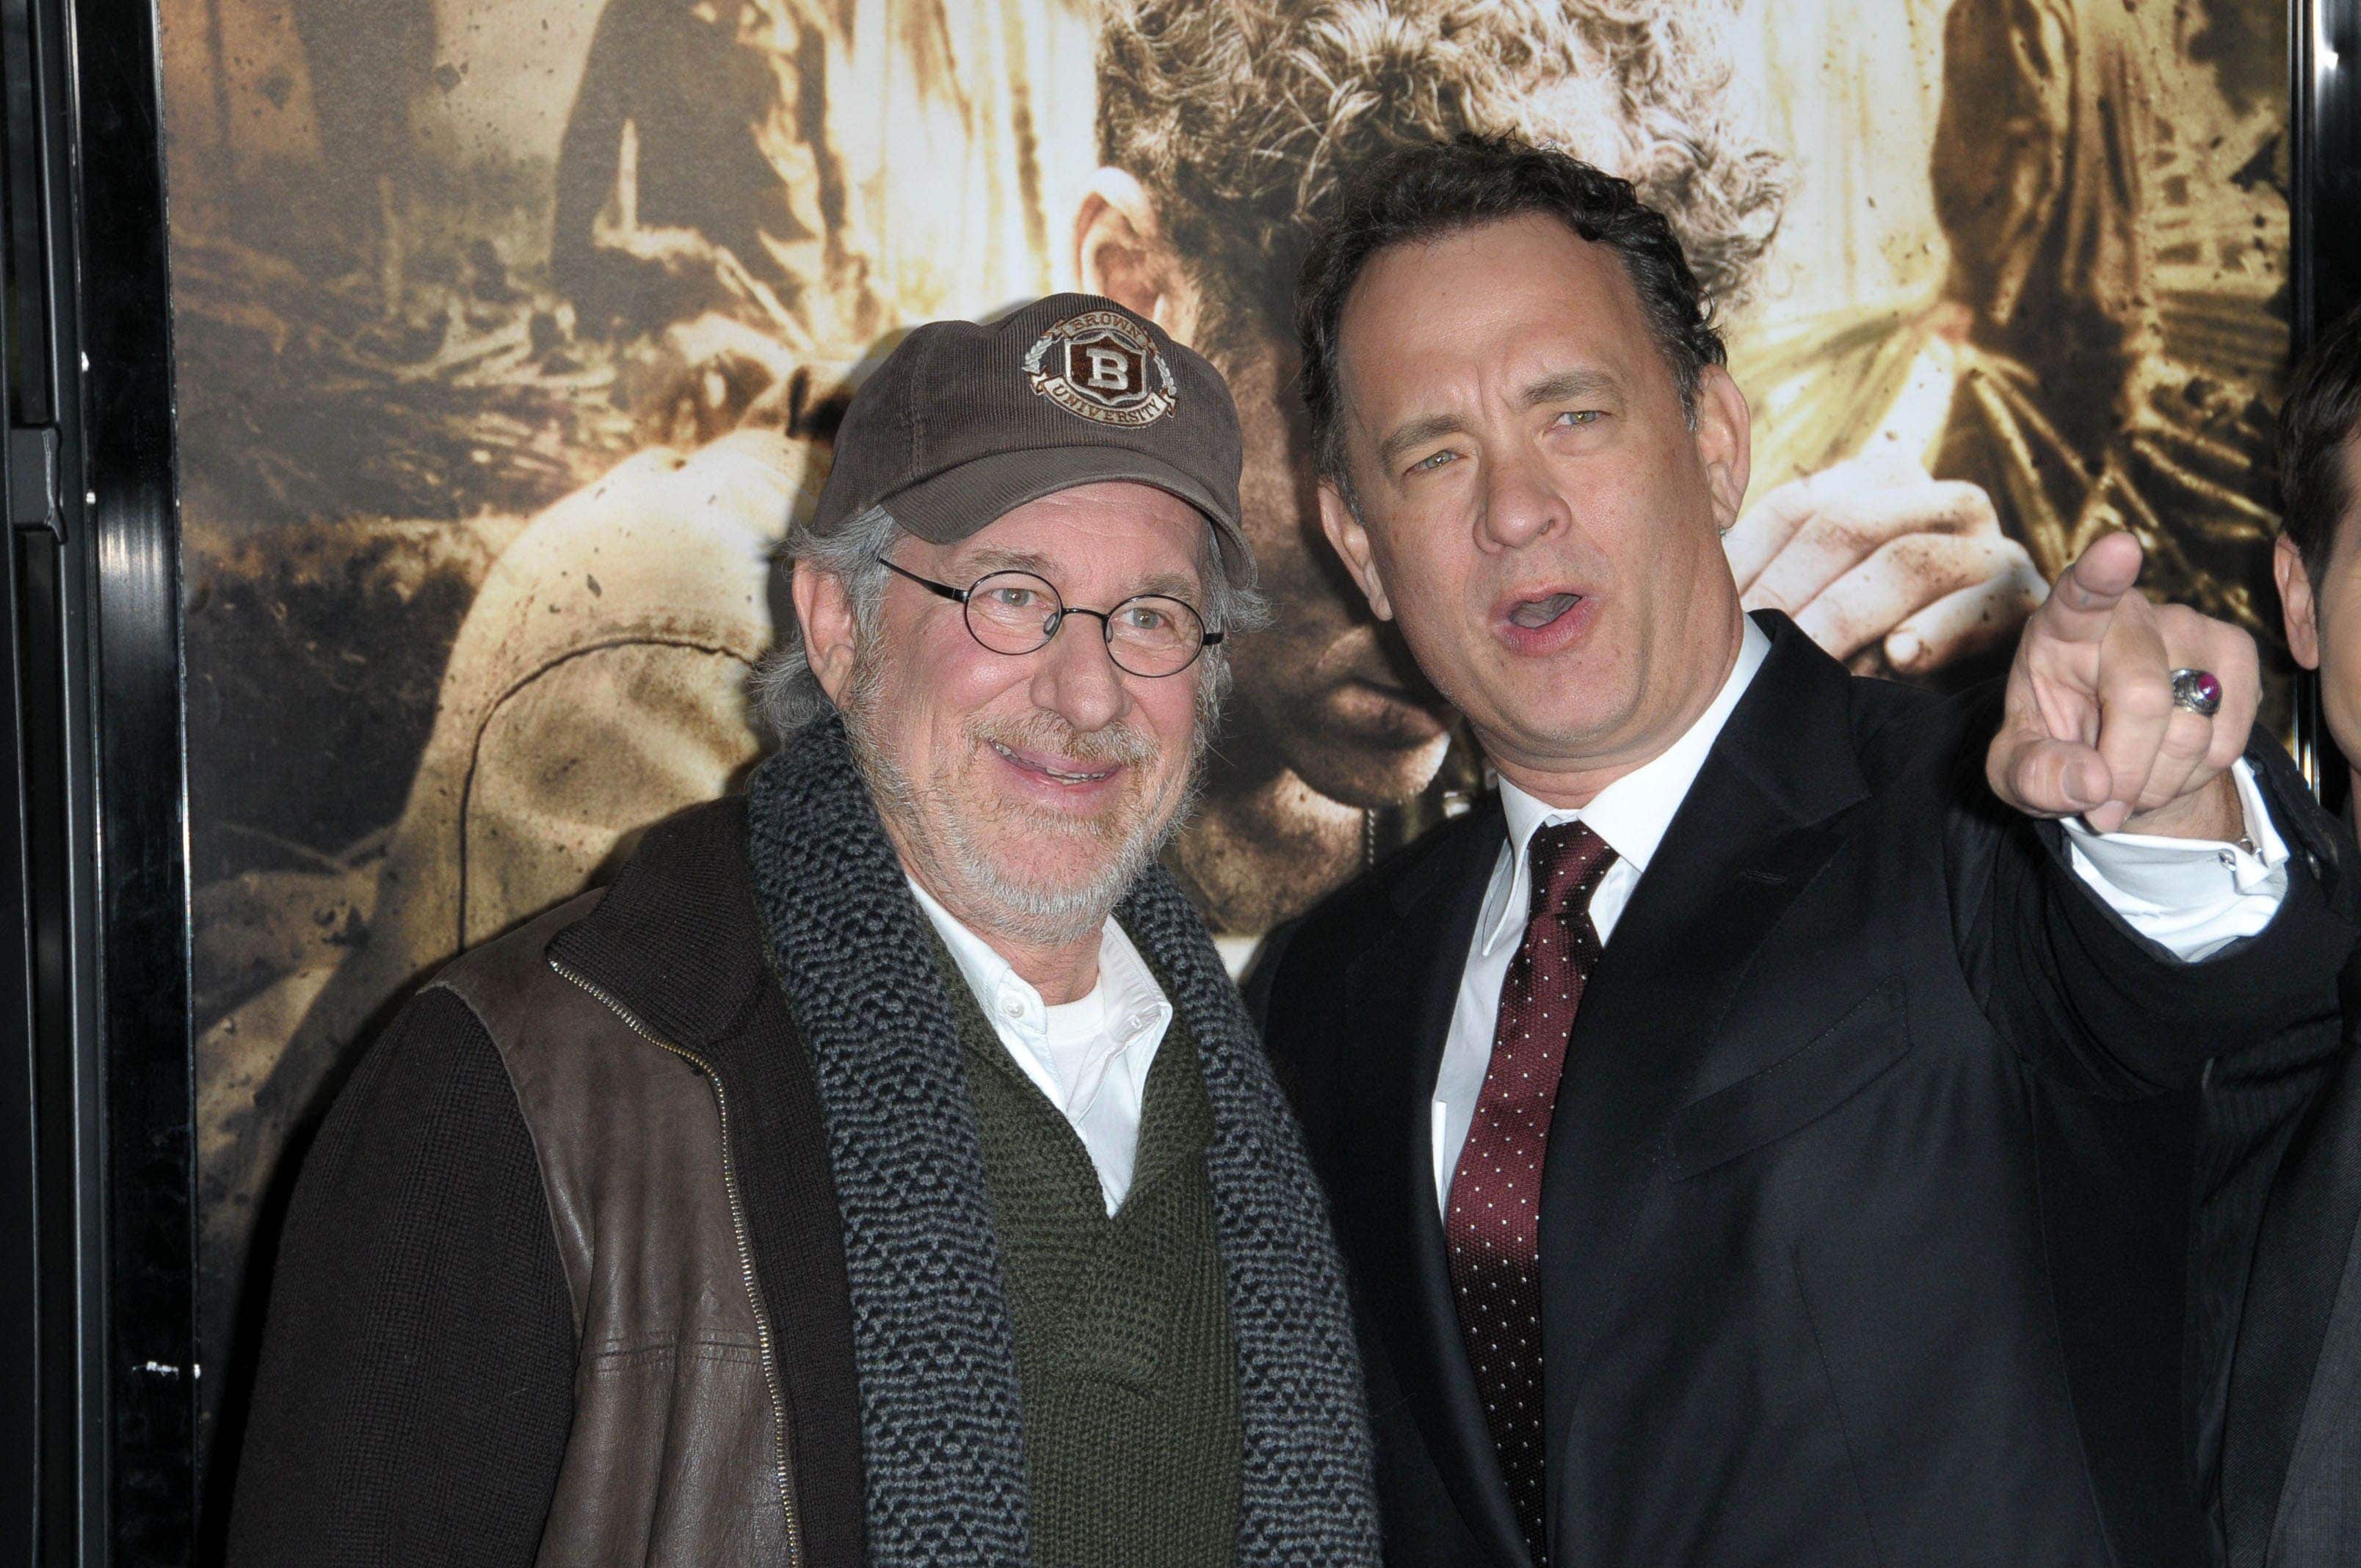 Steven Spielberg and Tom Hanks at 'The Pacific' Mini Series screening, Chinese Theater, Hollywood, CA. 02-24-10